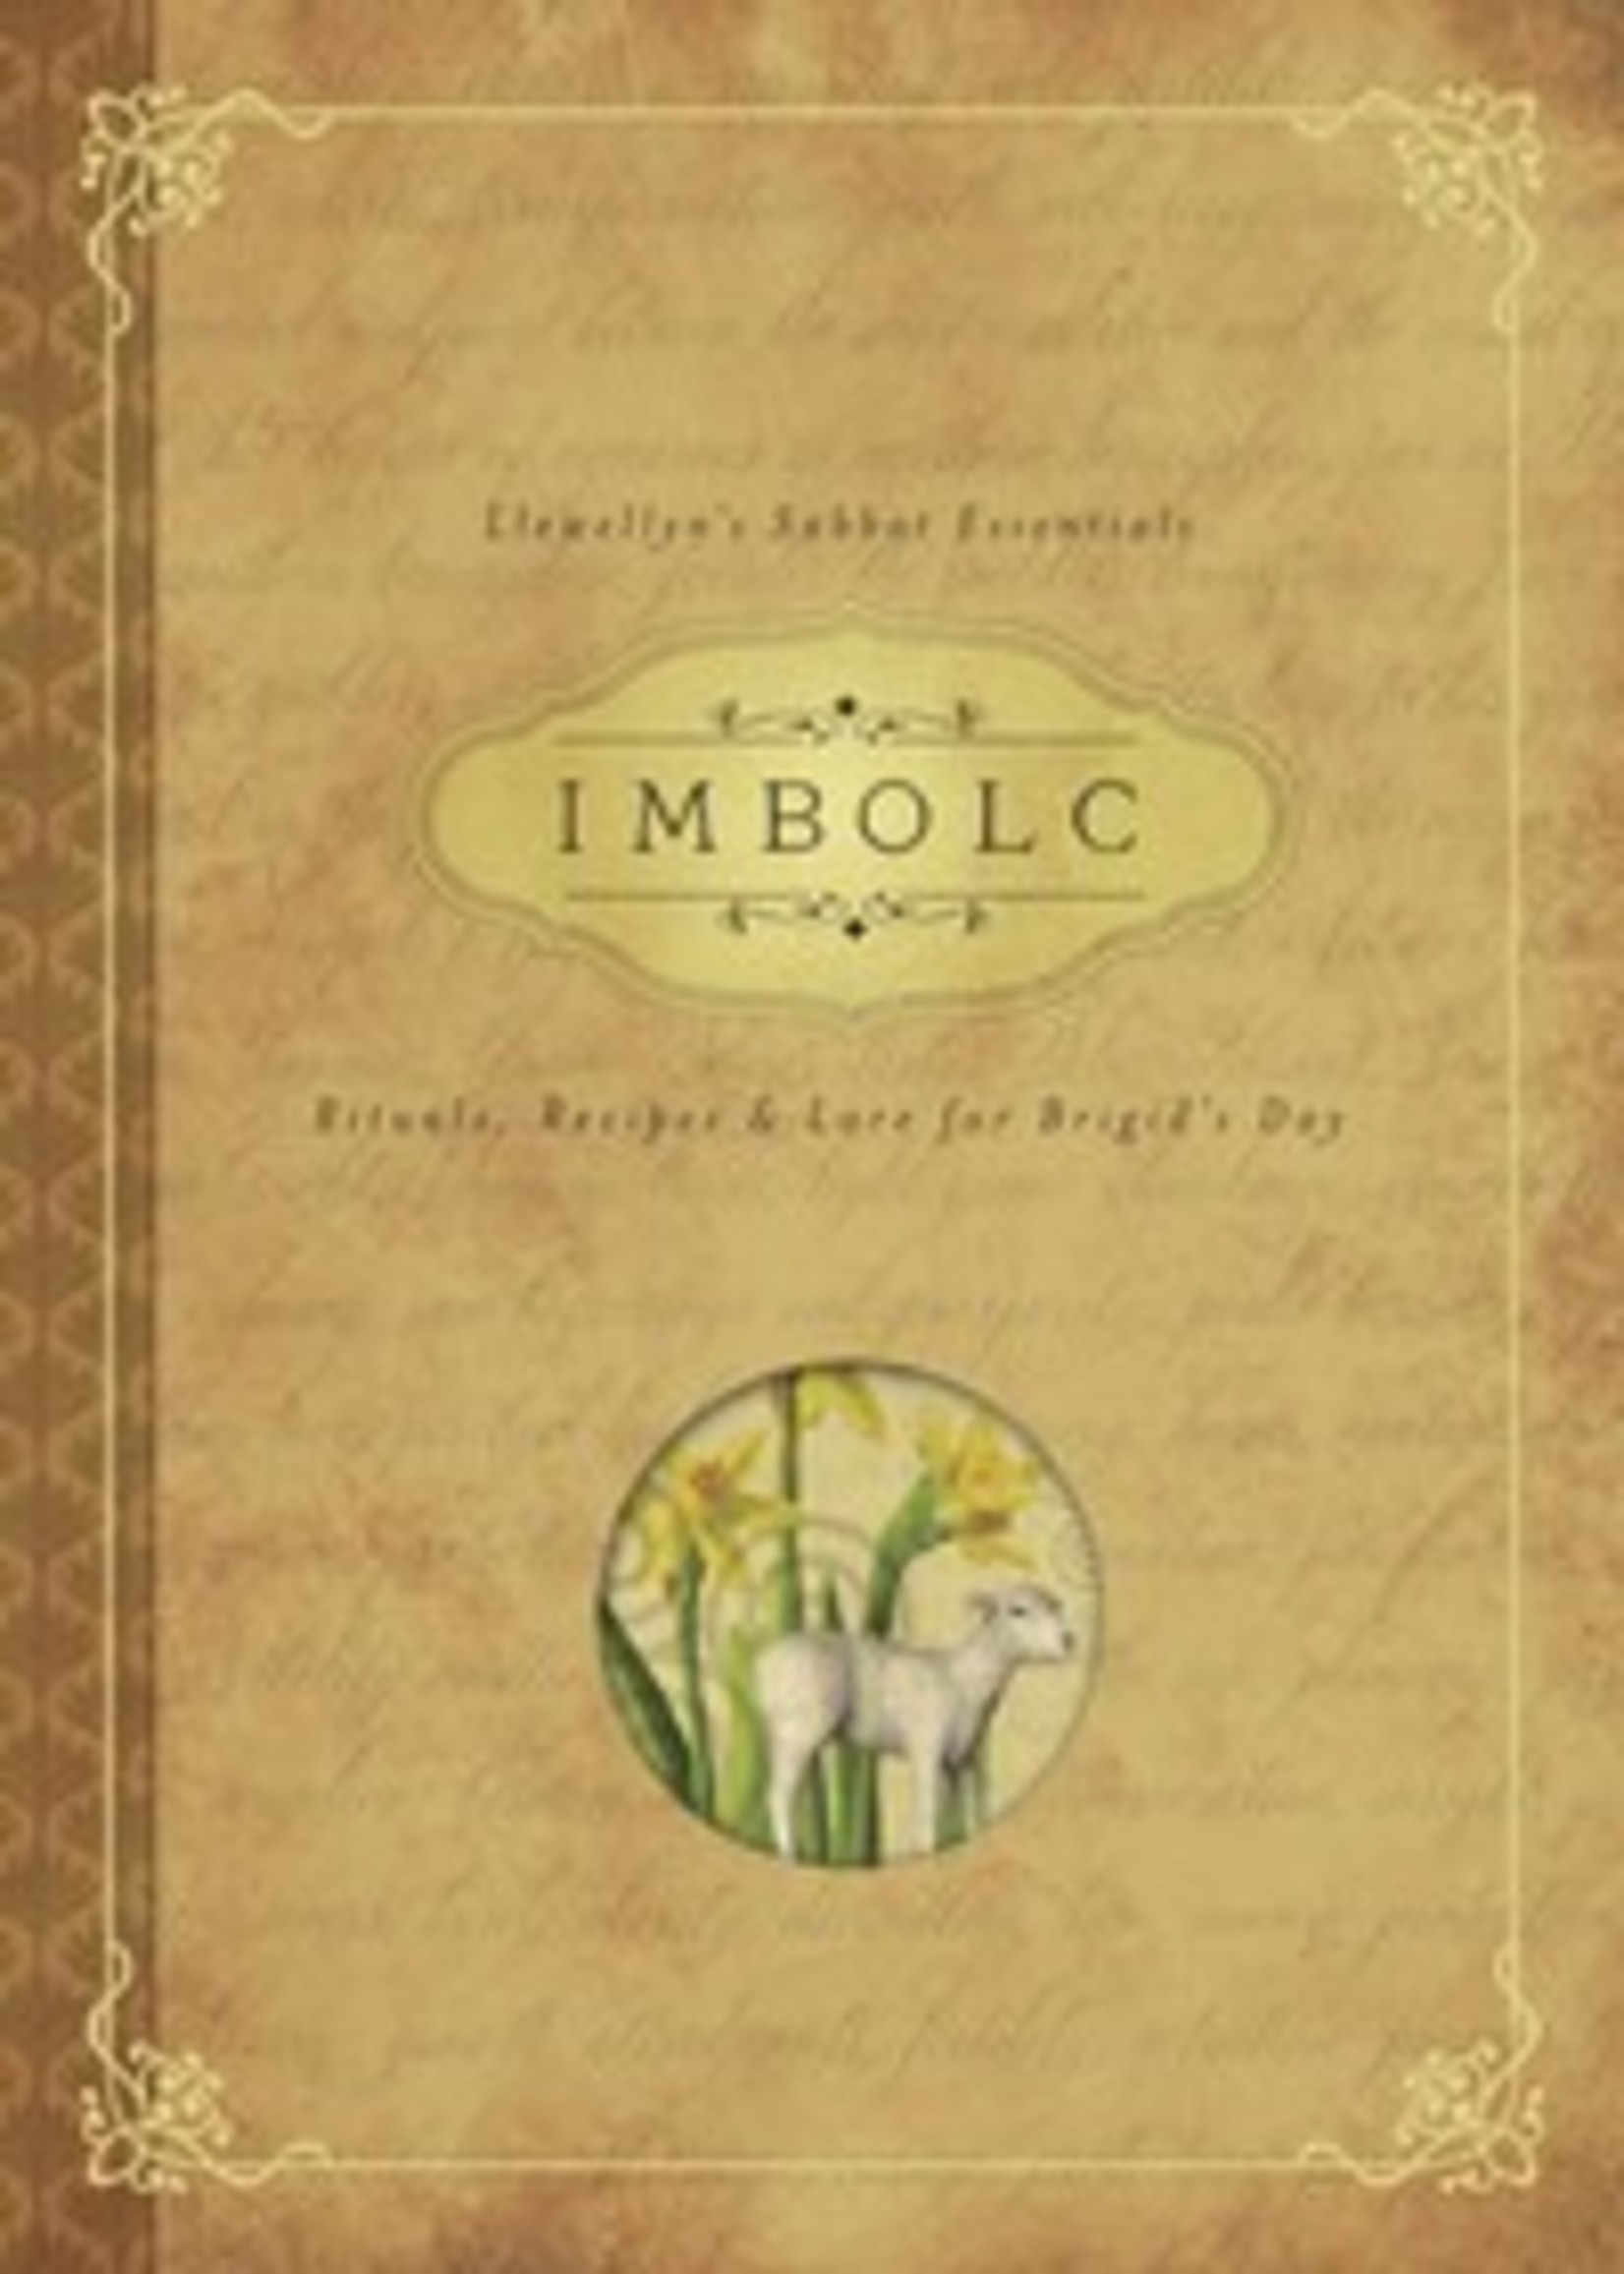 Llewellyn's Sabbat Essentials: Imbolc Rituals, Recipes and Lore for Brigid's Day by Carl F. Neal